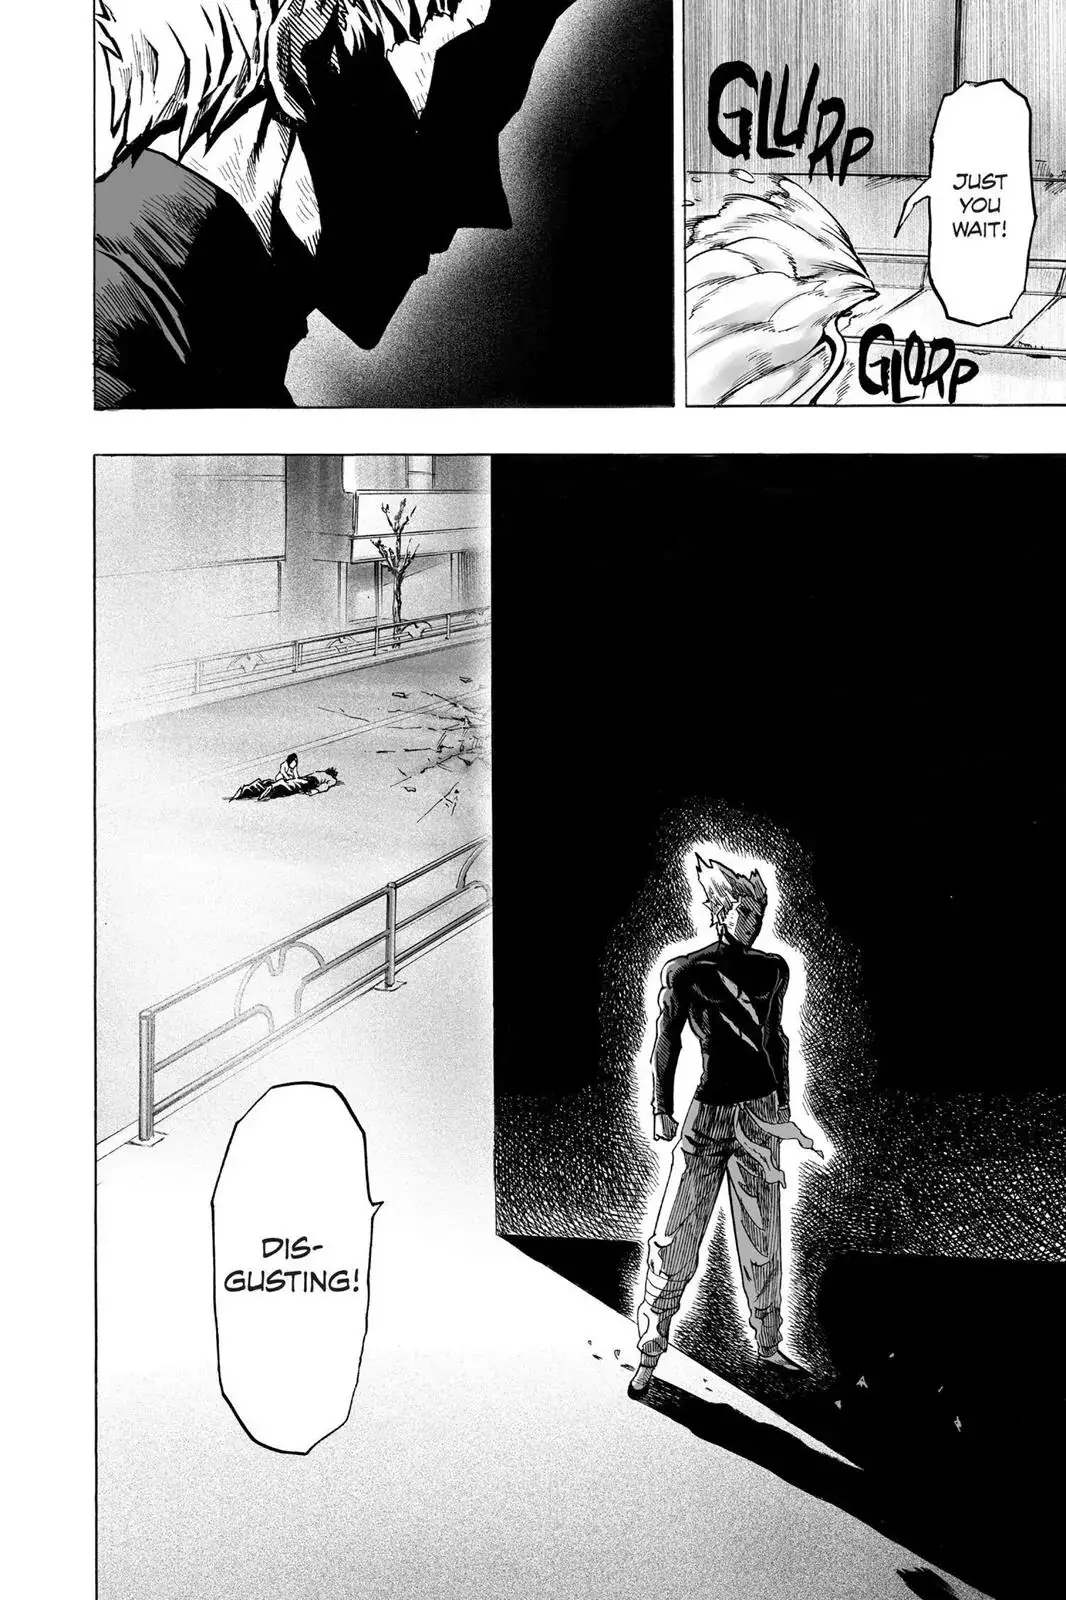 One Punch Man Chapter 59, READ One Punch Man Chapter 59 ONLINE, lost in the cloud genre,lost in the cloud gif,lost in the cloud girl,lost in the cloud goods,lost in the cloud goodreads,lost in the cloud,lost ark cloud gaming,lost odyssey cloud gaming,lost in the cloud fanart,lost in the cloud fanfic,lost in the cloud fandom,lost in the cloud first kiss,lost in the cloud font,lost in the cloud ending,lost in the cloud episode 97,lost in the cloud edit,lost in the cloud explained,lost in the cloud dog,lost in the cloud discord server,lost in the cloud desktop wallpaper,lost in the cloud drawing,can't find my cloud on network,lost in the cloud characters,lost in the cloud chapter 93 release date,lost in the cloud birthday,lost in the cloud birthday art,lost in the cloud background,lost in the cloud banner,lost in the clouds meaning,what is the black cloud in lost,lost in the cloud ao3,lost in the cloud anime,lost in the cloud art,lost in the cloud author twitter,lost in the cloud author instagram,lost in the cloud artist,lost in the cloud acrylic stand,lost in the cloud artist twitter,lost in the cloud art style,lost in the cloud analysis